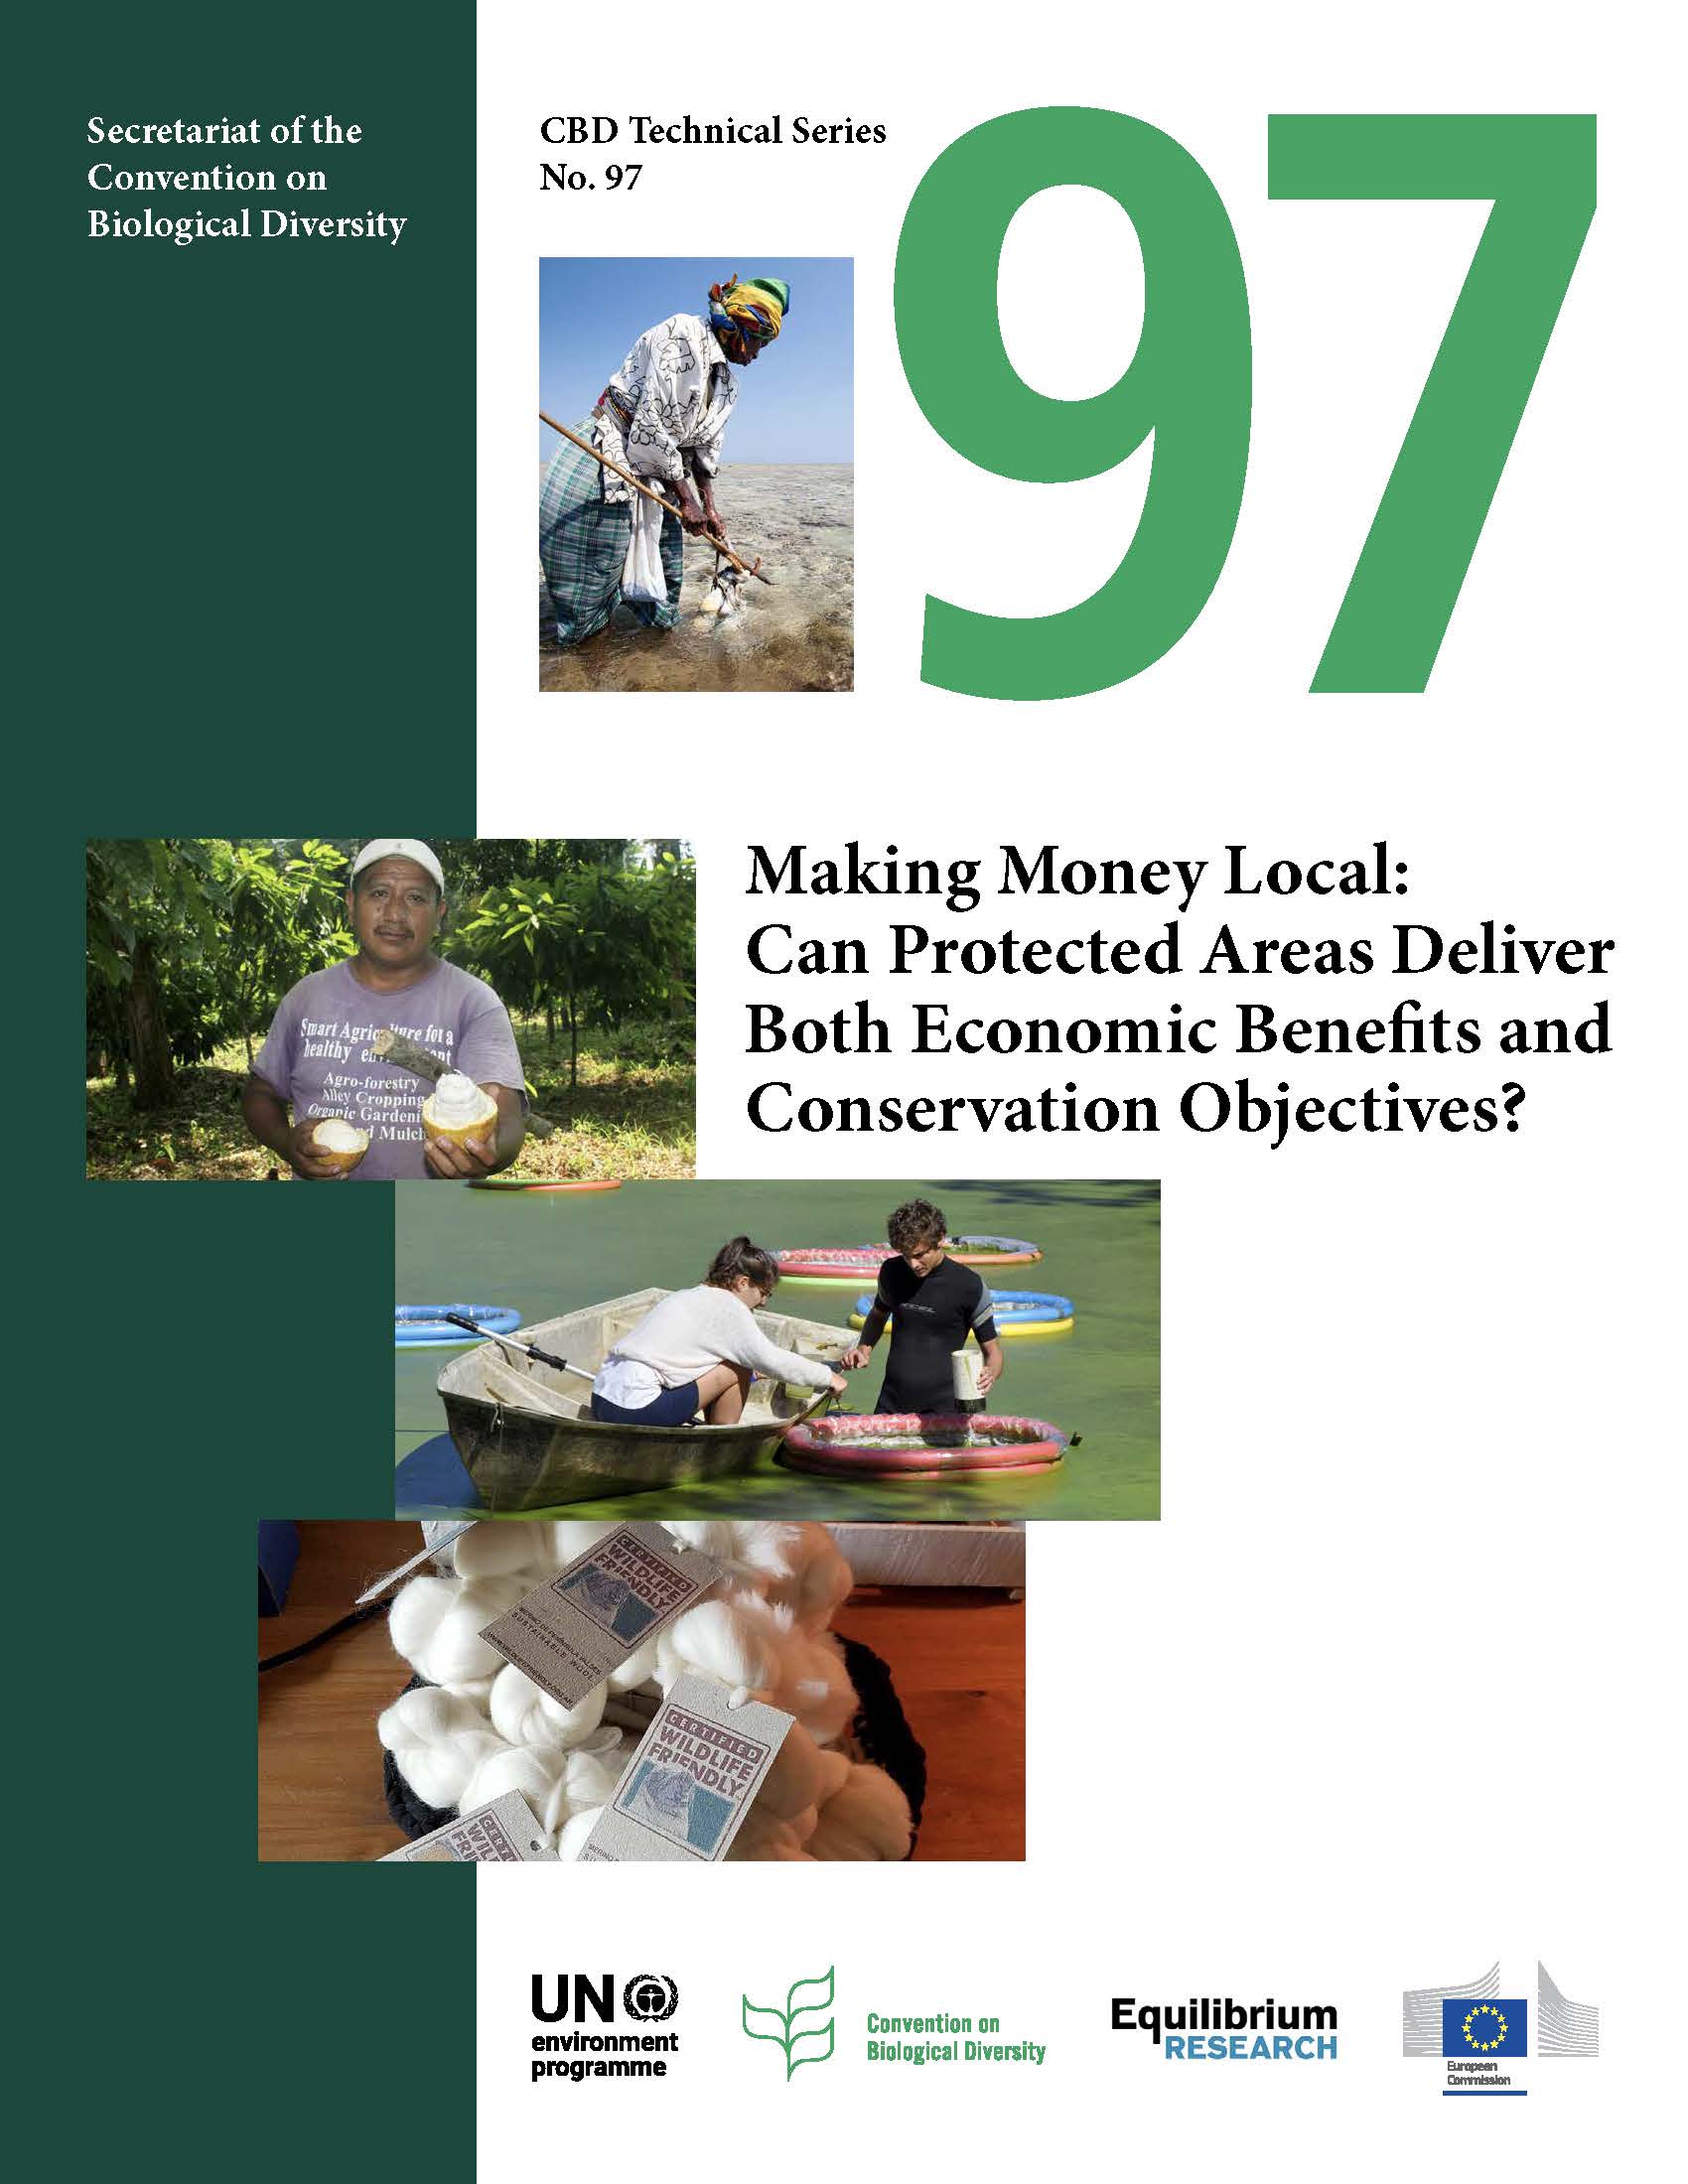 Making Money Local: Can Protected Areas Deliver Both Economic Benefits and Conservation Objectives?